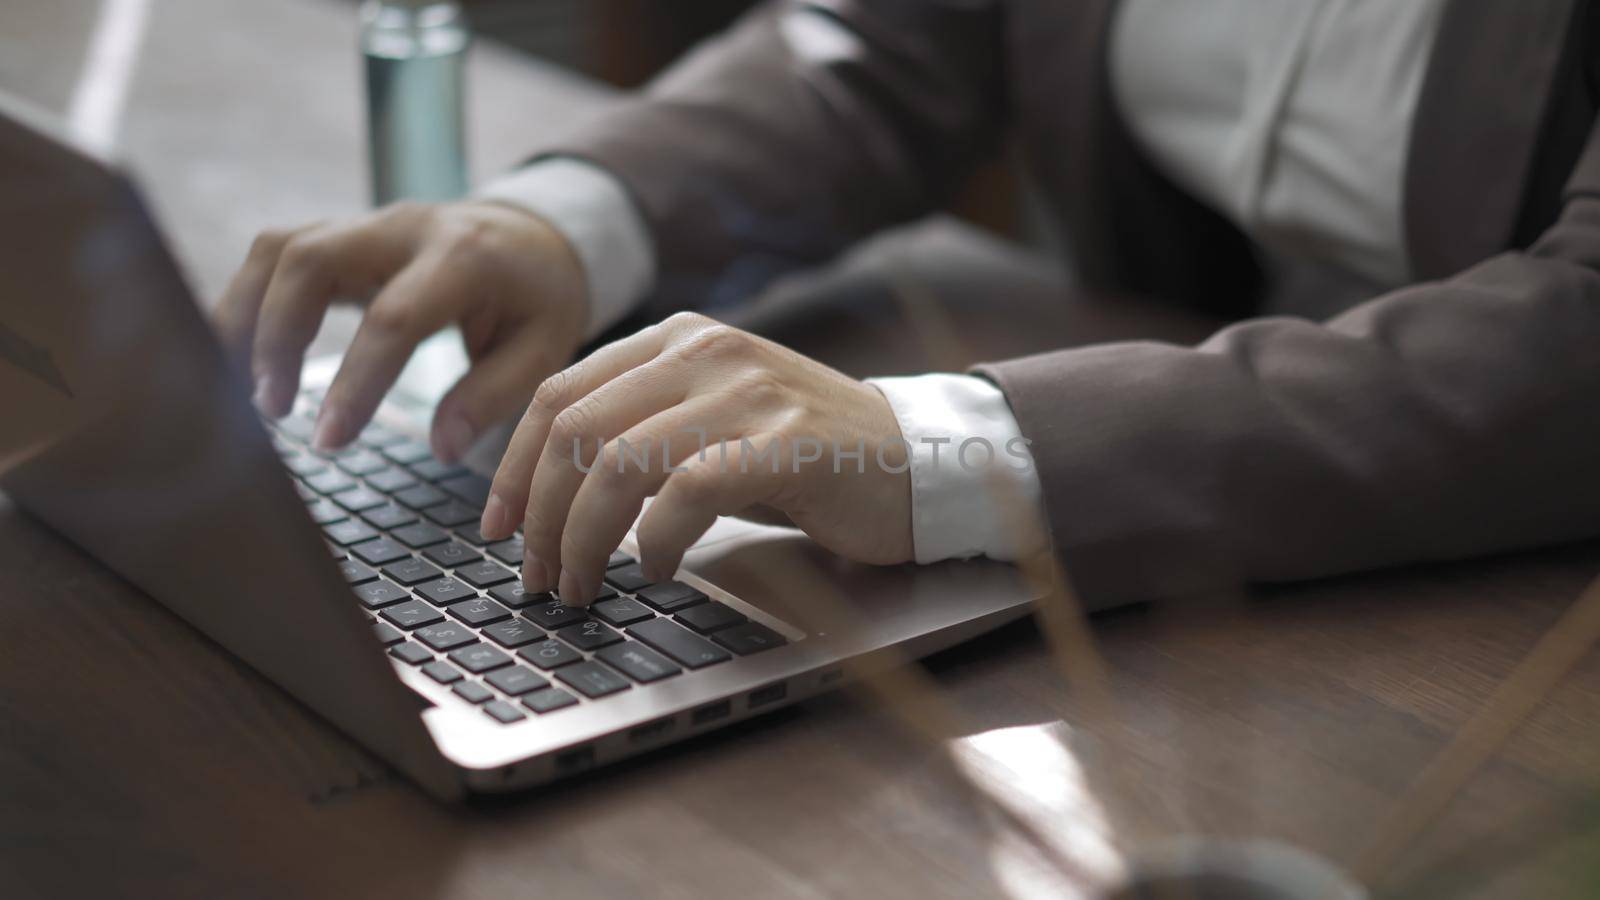 Business Woman In Suit Works With Laptop Sitting At Office Desk With Sanitizer And Incense Sticks On It, Close Up Of Female Hands Typing On Laptop Keyboard